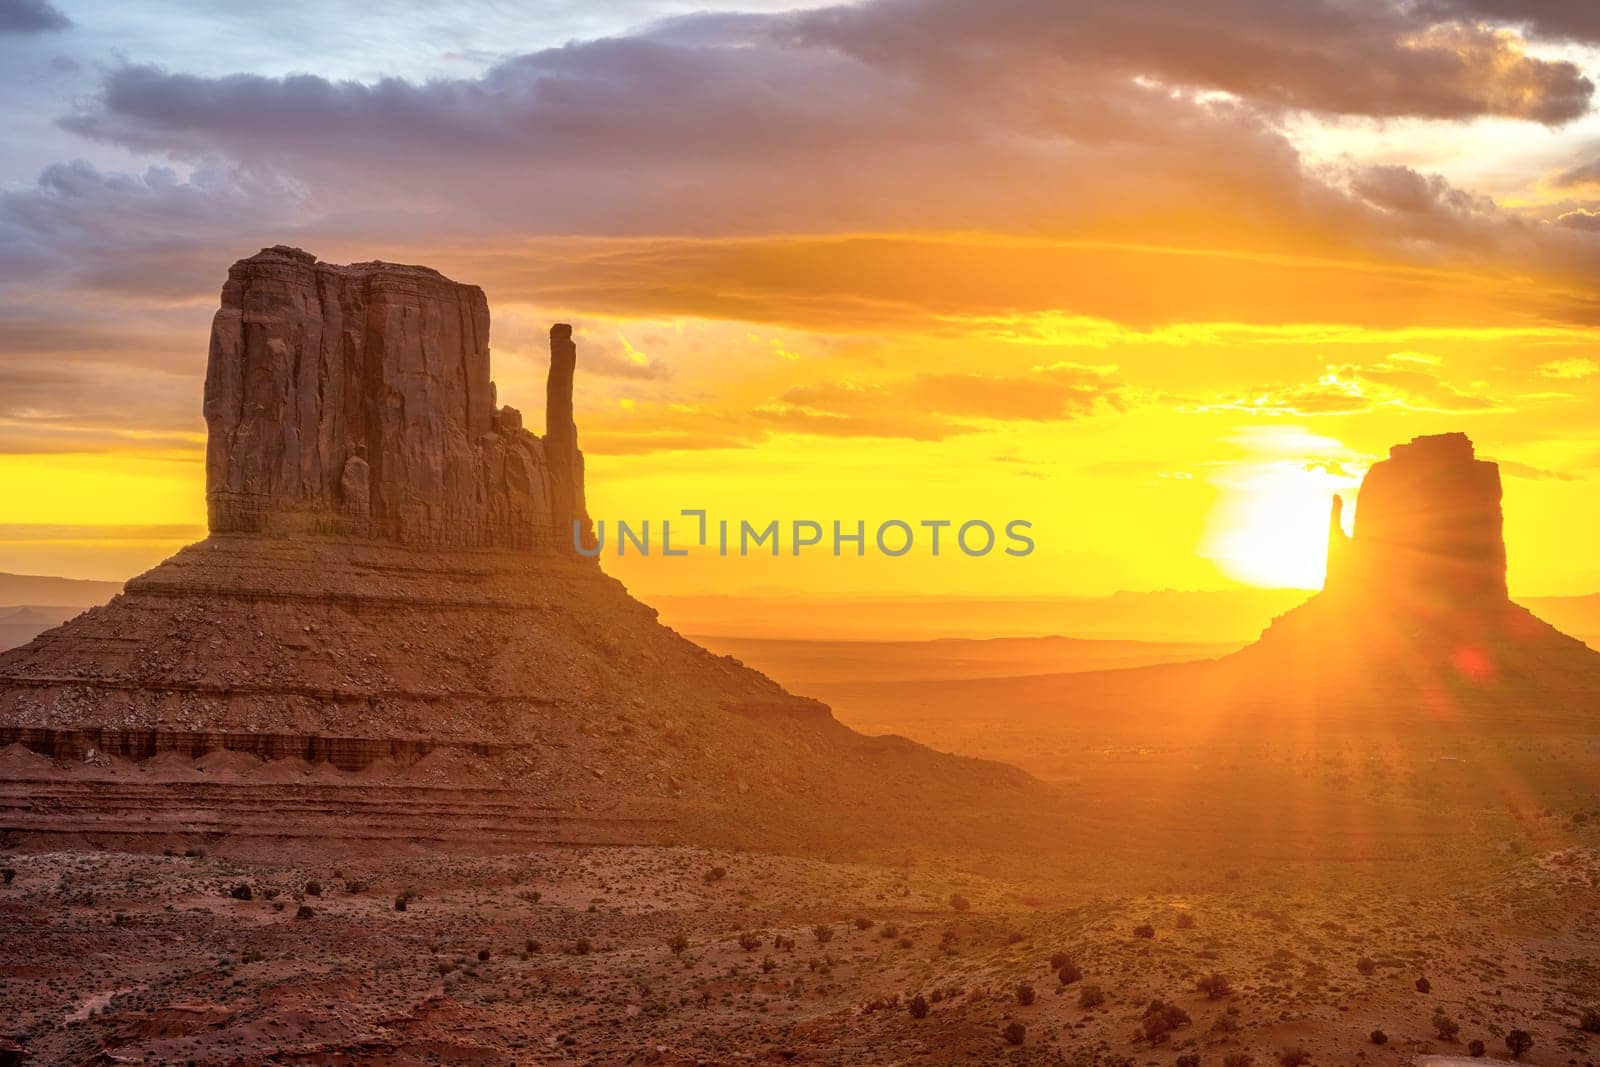 Sunrise in the famous Monument Valley by elxeneize